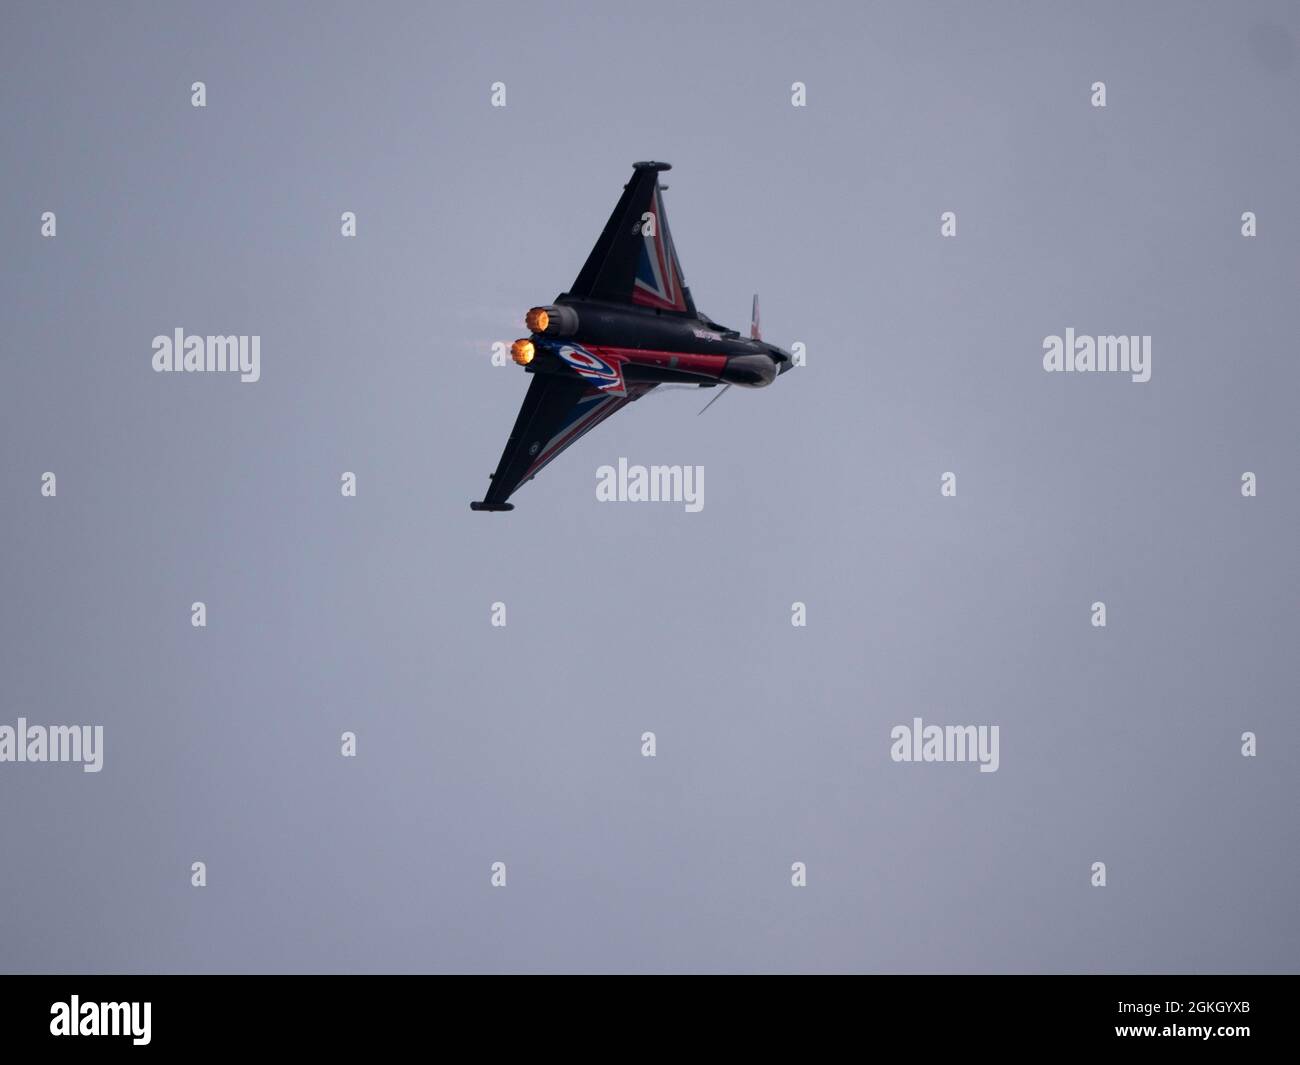 RAF Typhoon fighter jet rolling into inverted position with full afterburners on at the 2021 Bournemouth Air Display. Stock Photo